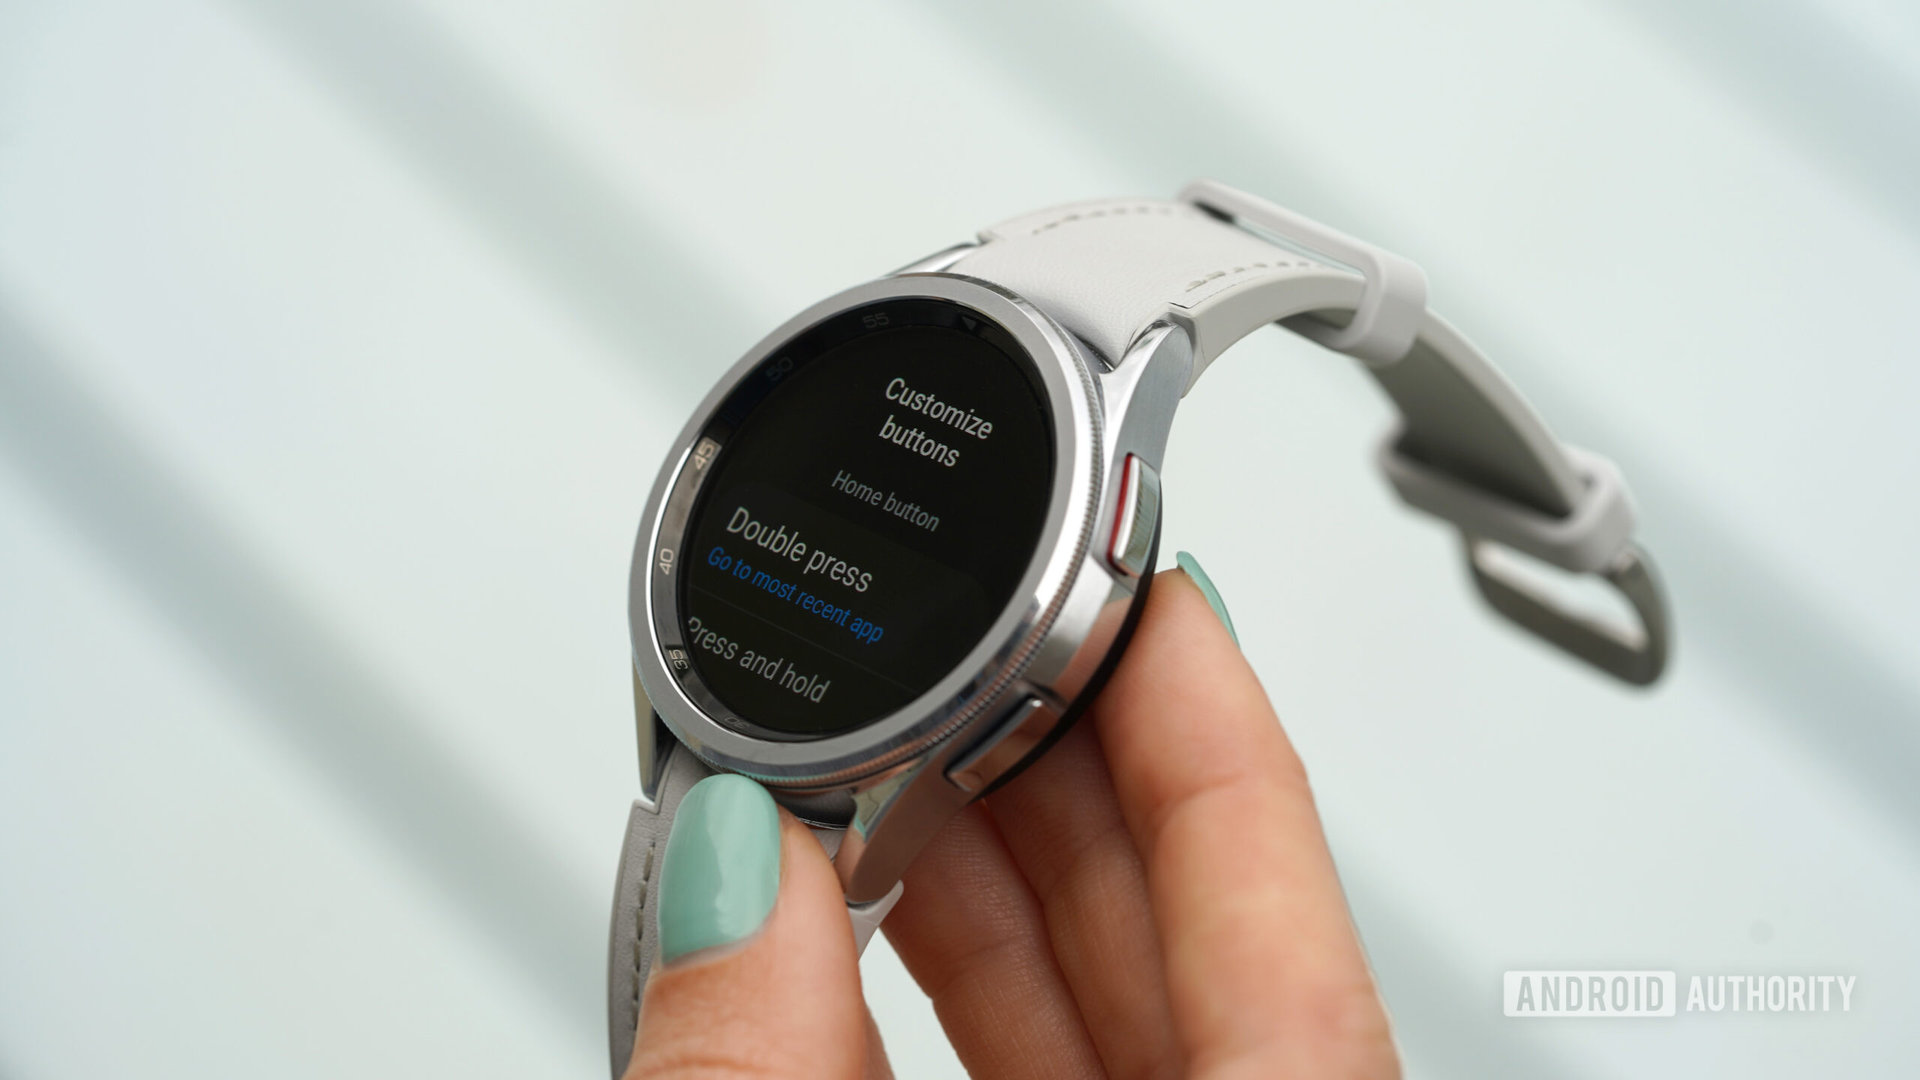 All Samsung smartwatches feature two customizable buttons.